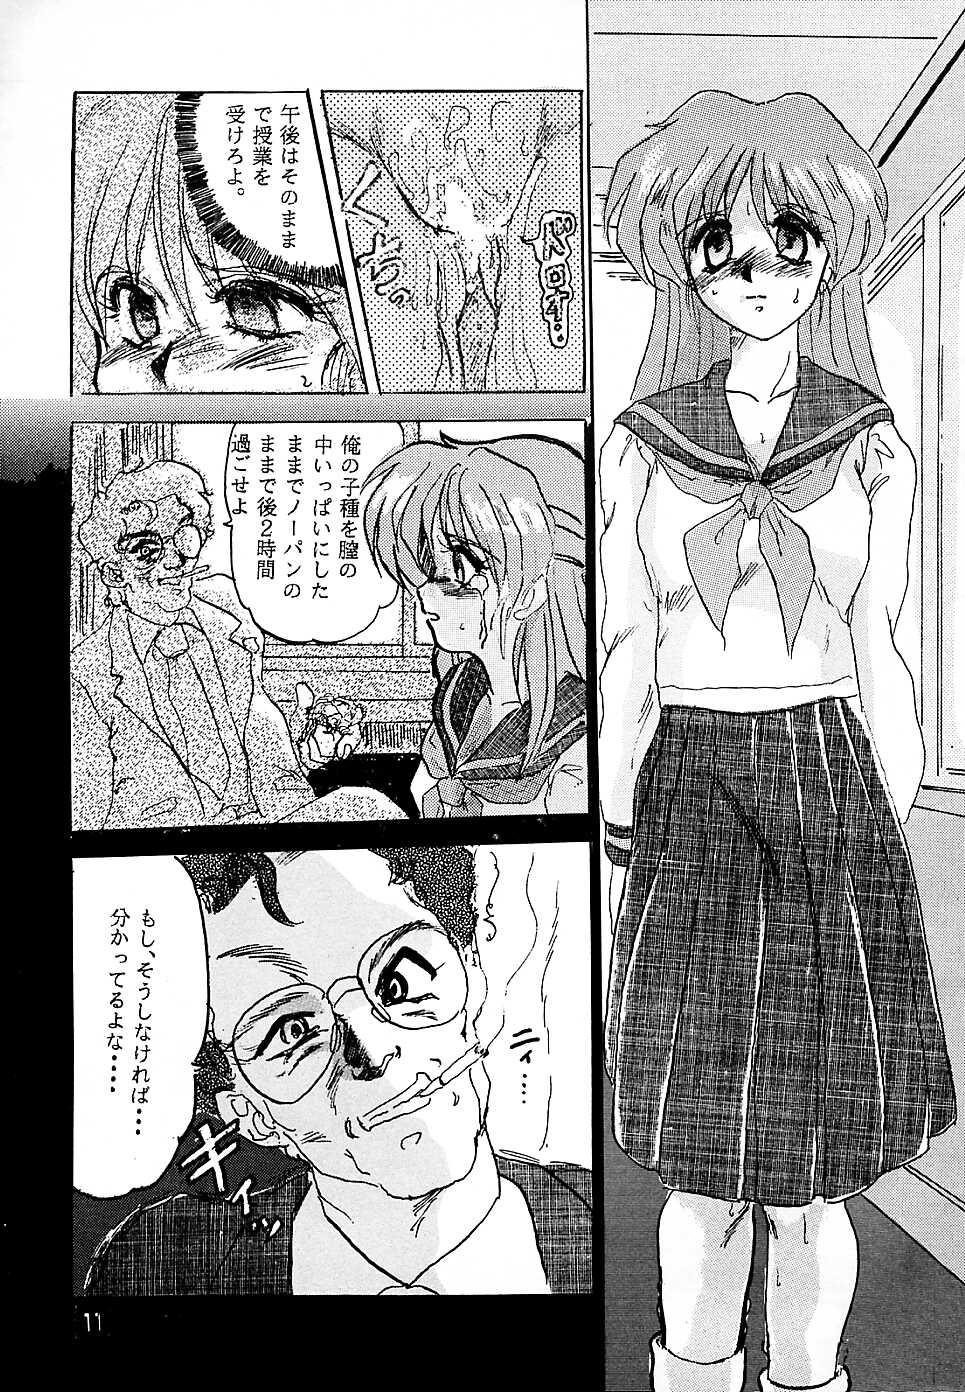 18 Year Old Porn F 93C - Brave express might gaine Orgia - Page 10